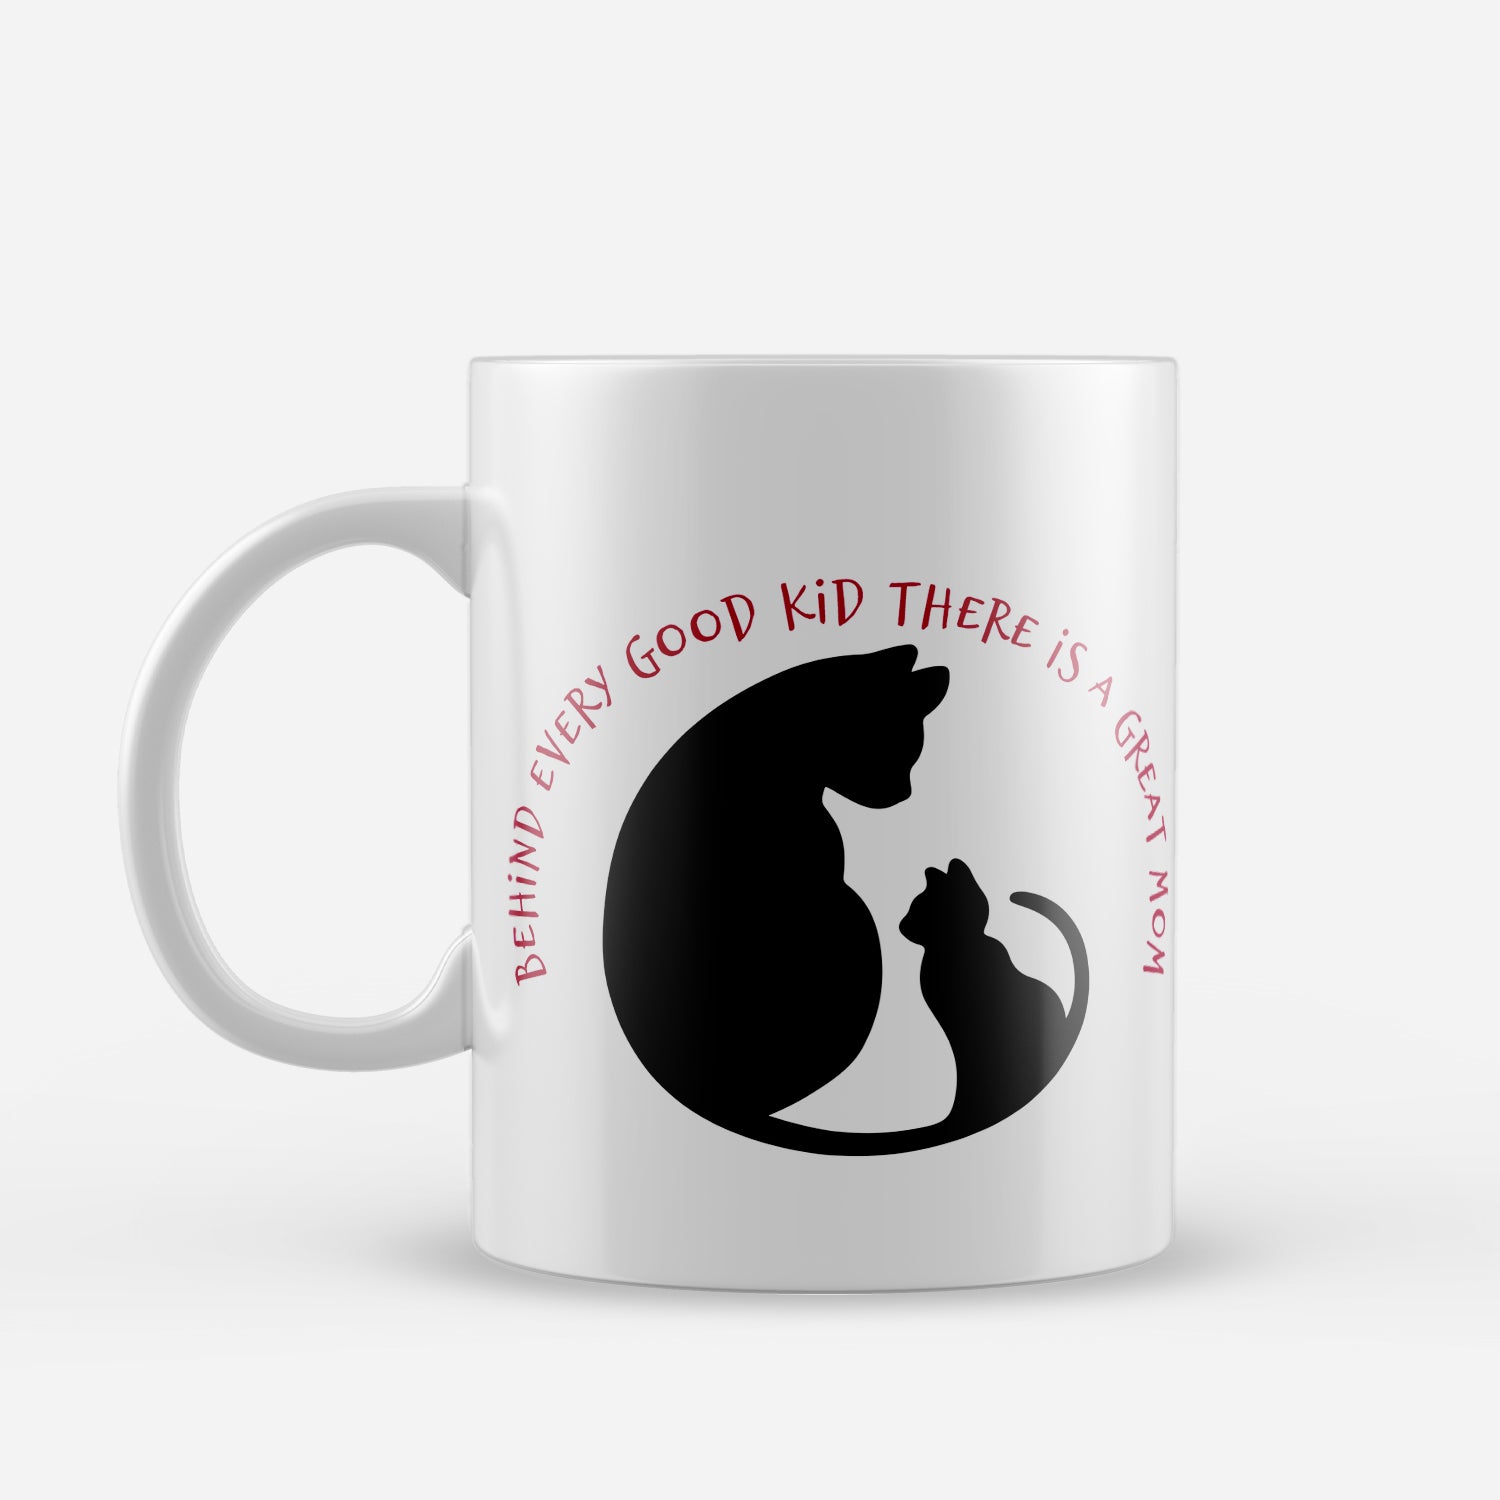 "Behind every good kid there is a great mom" Mother's Day theme Ceramic Coffee Mugs 2